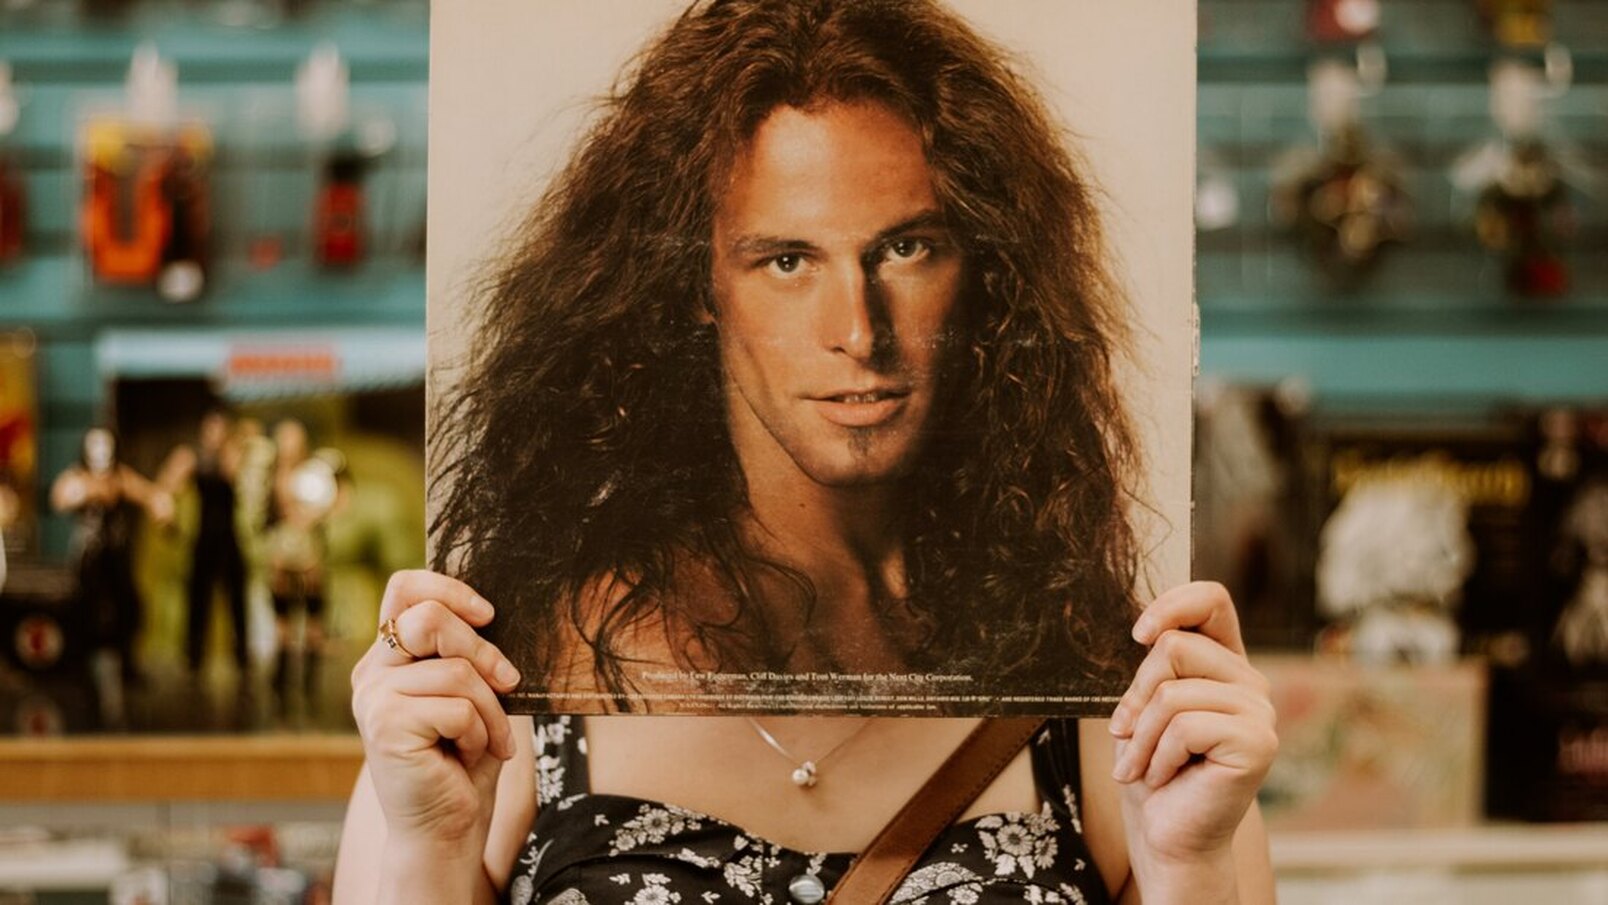 Here is an image of a woman holding up a record cover over her face. The cover is of a man with long curly hair.